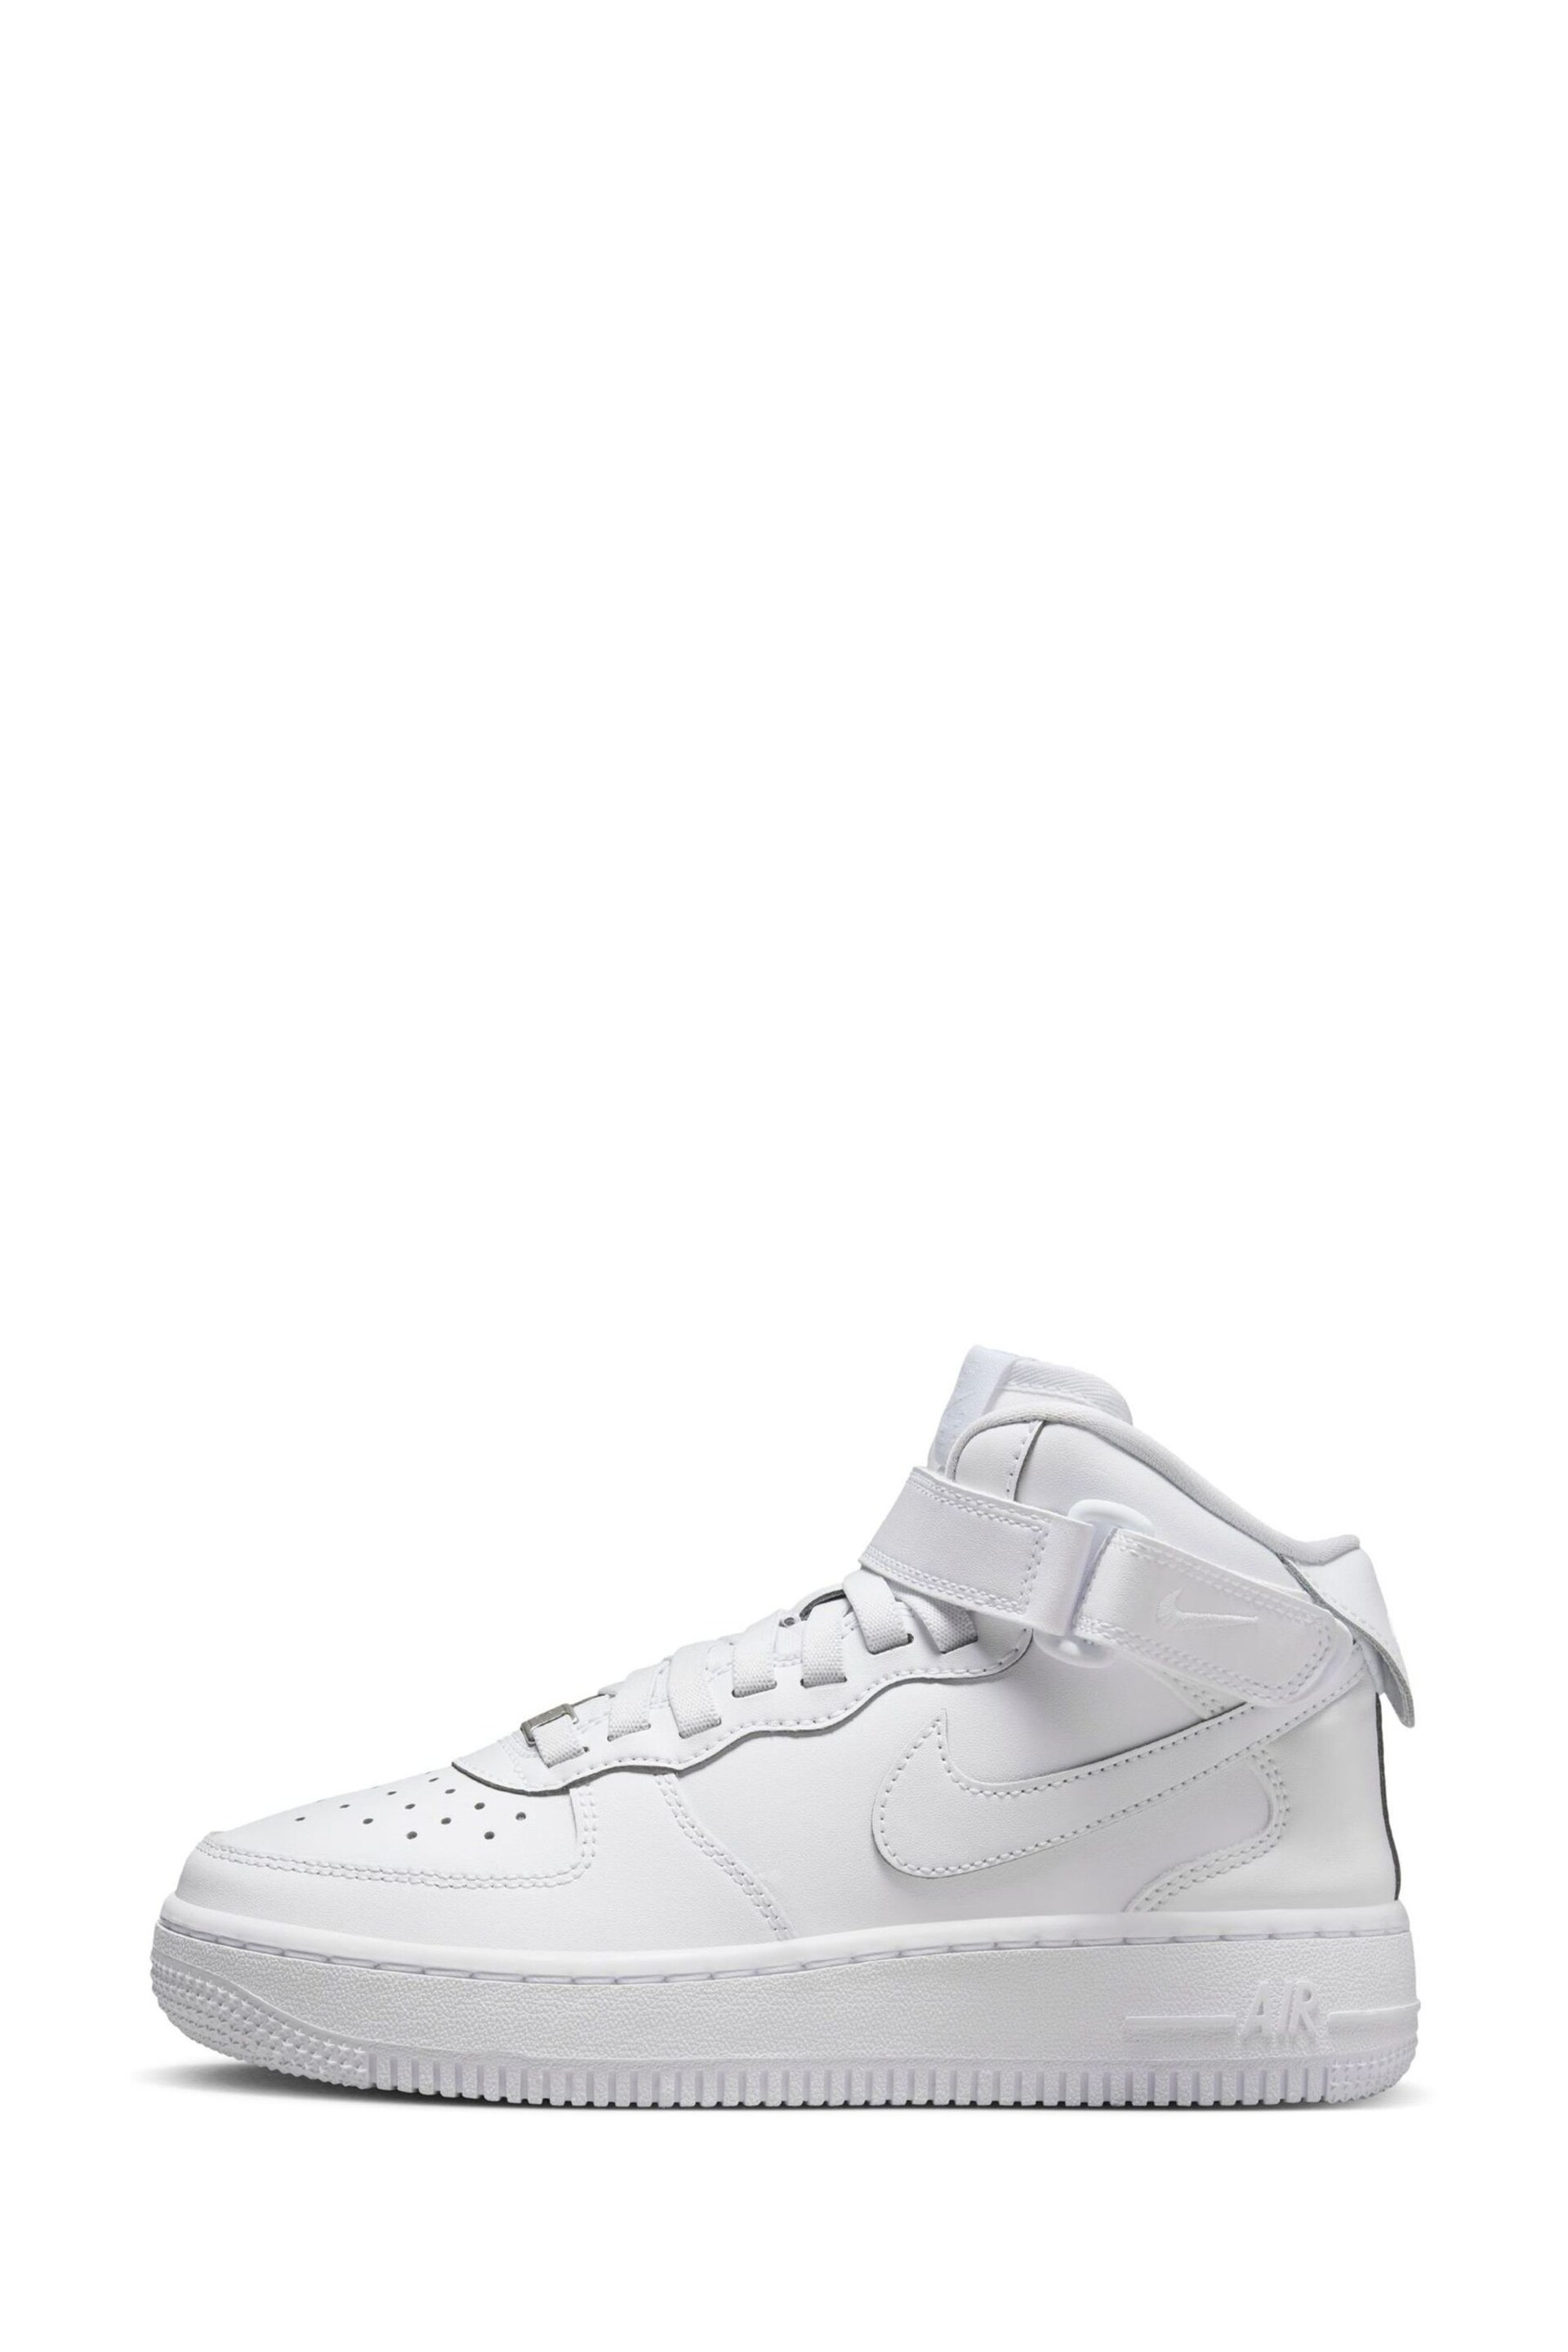 Nike White Youth Air Force 1 Mid EasyOn Trainers - Image 3 of 13